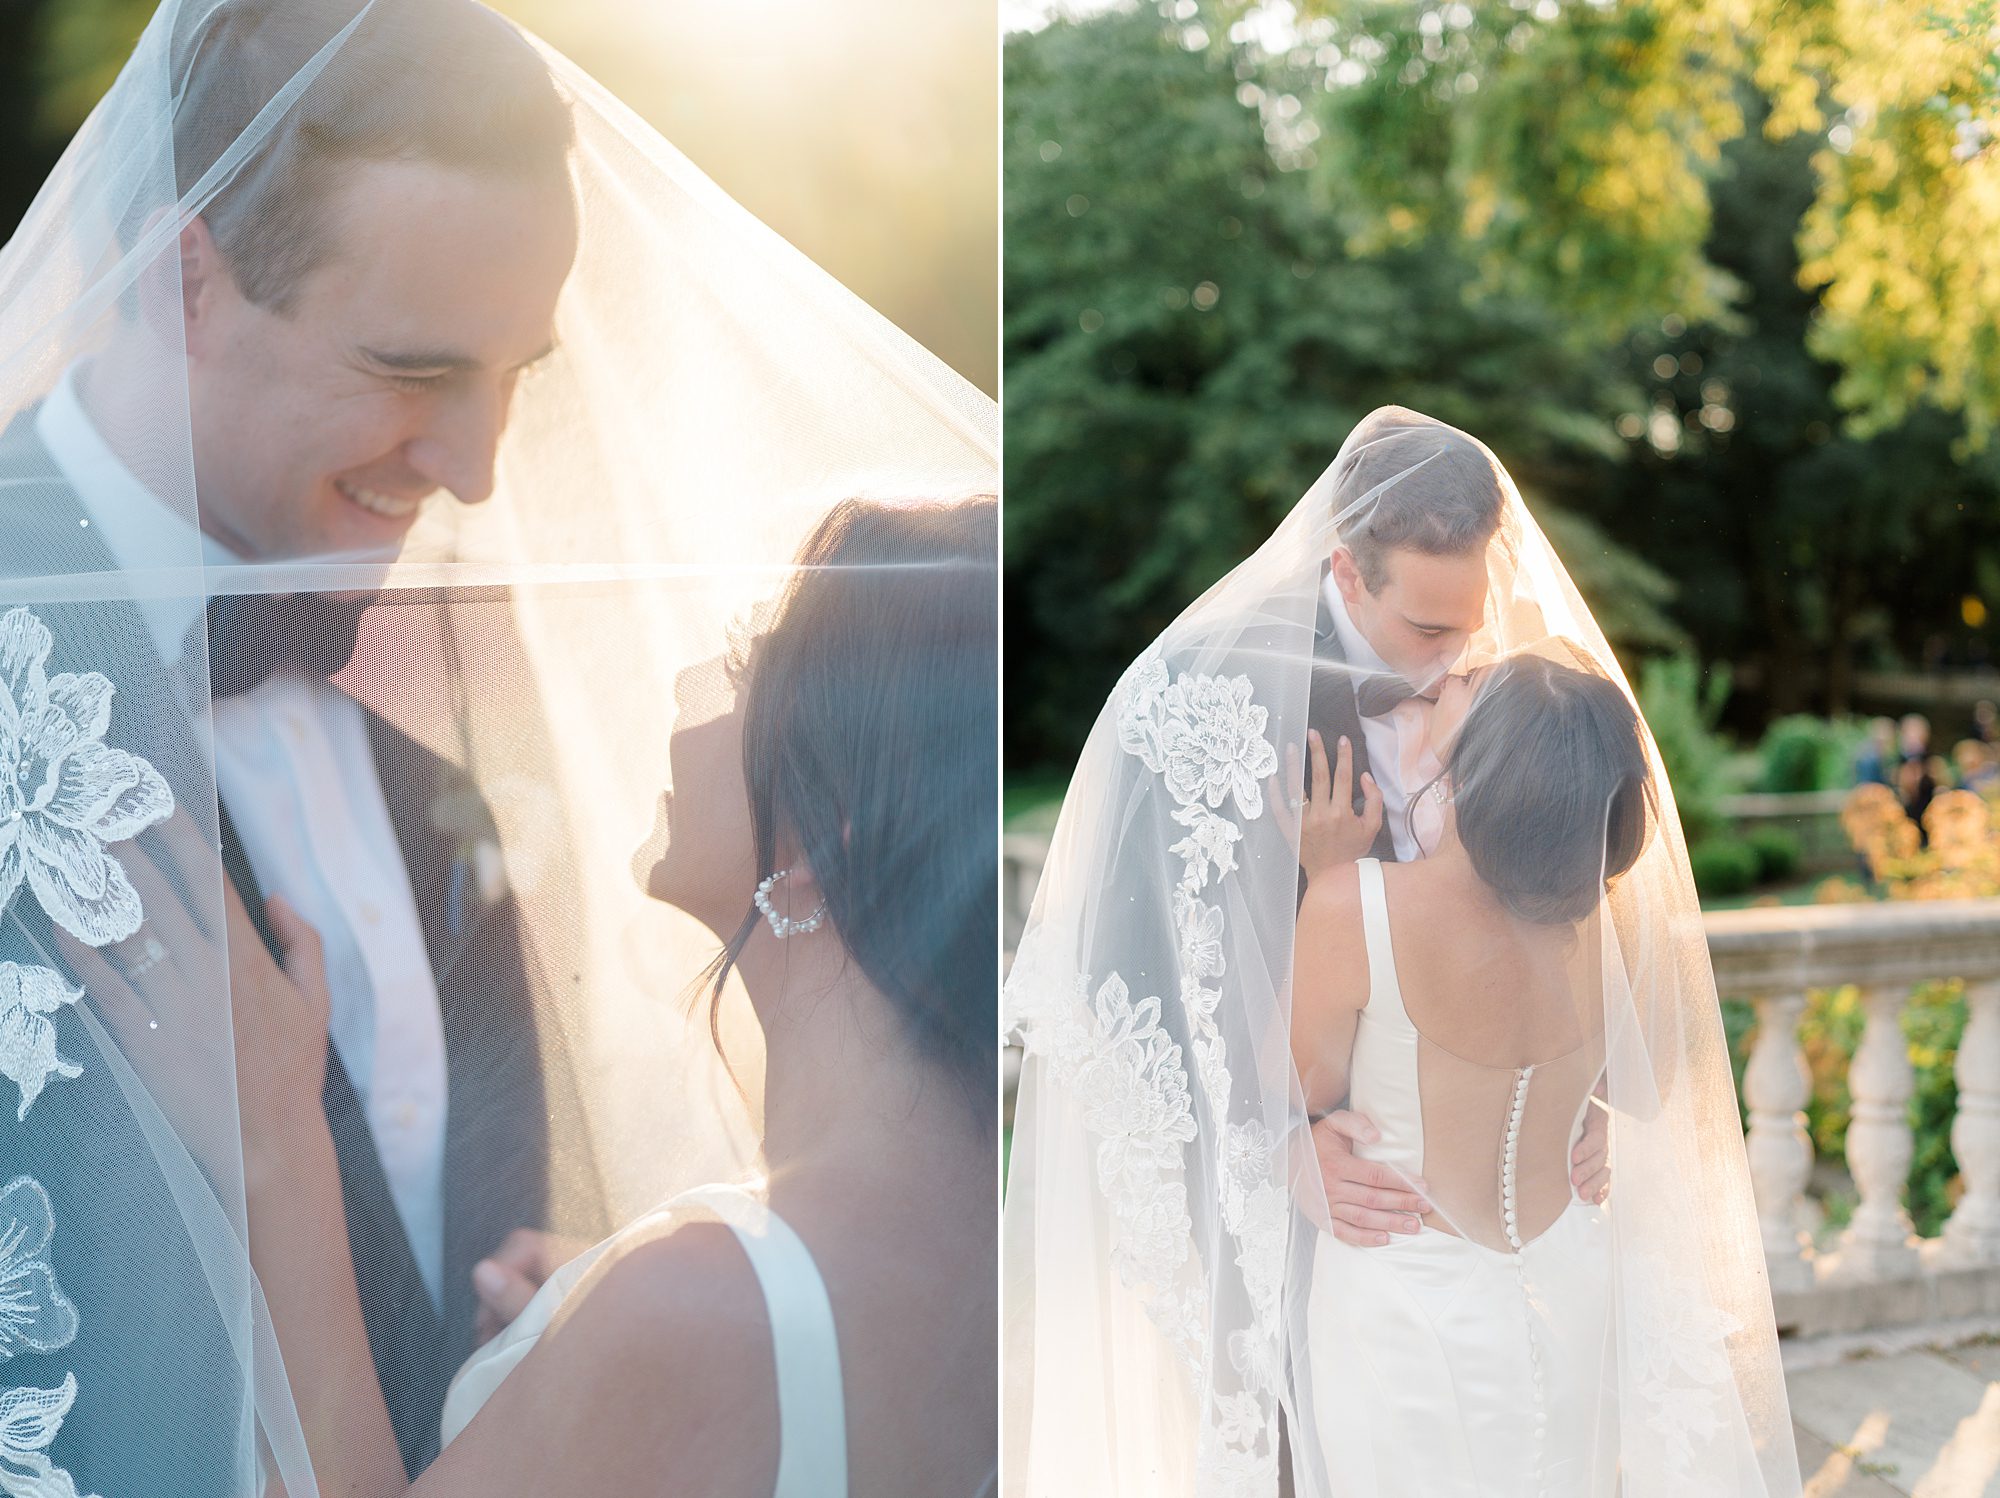 newlyweds with veil wrapped around them in the sonlight